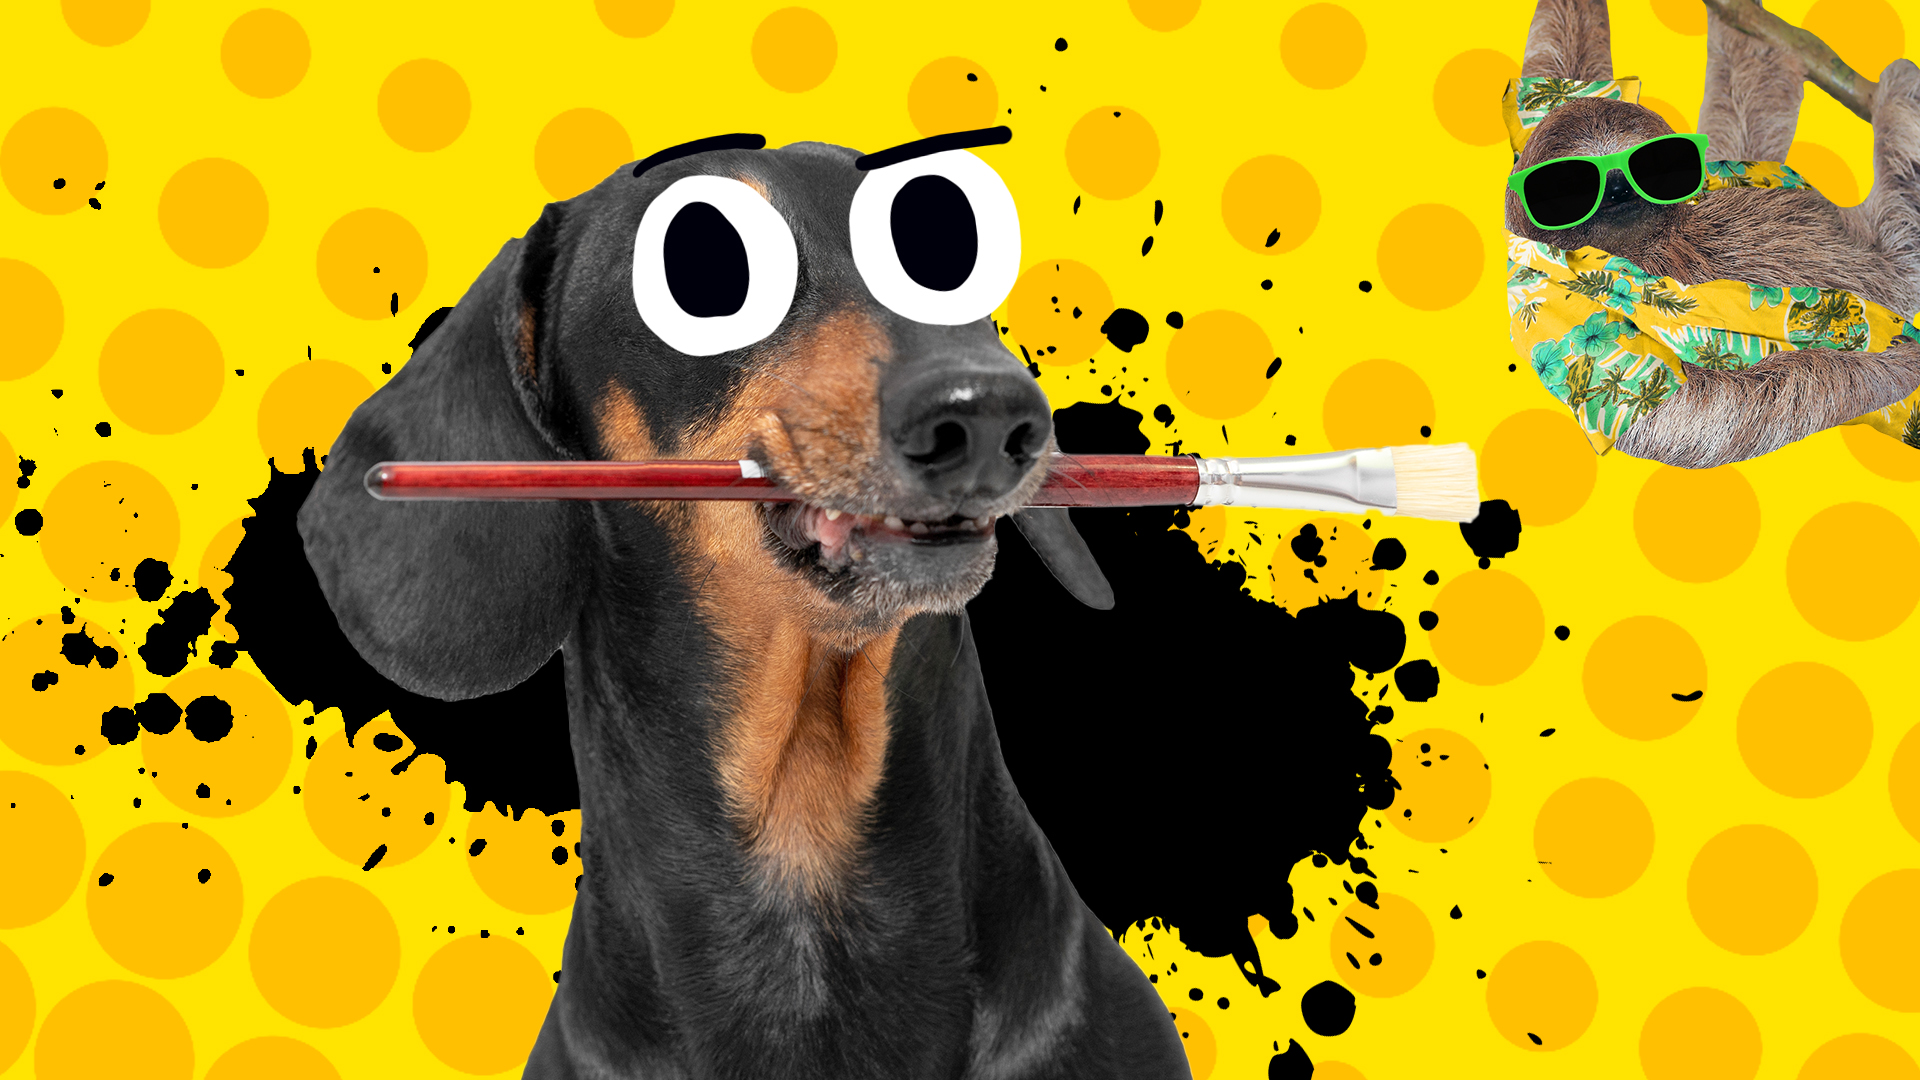 A dachshund holding a paintbrush – and there's a sloth chilling out in the corner too